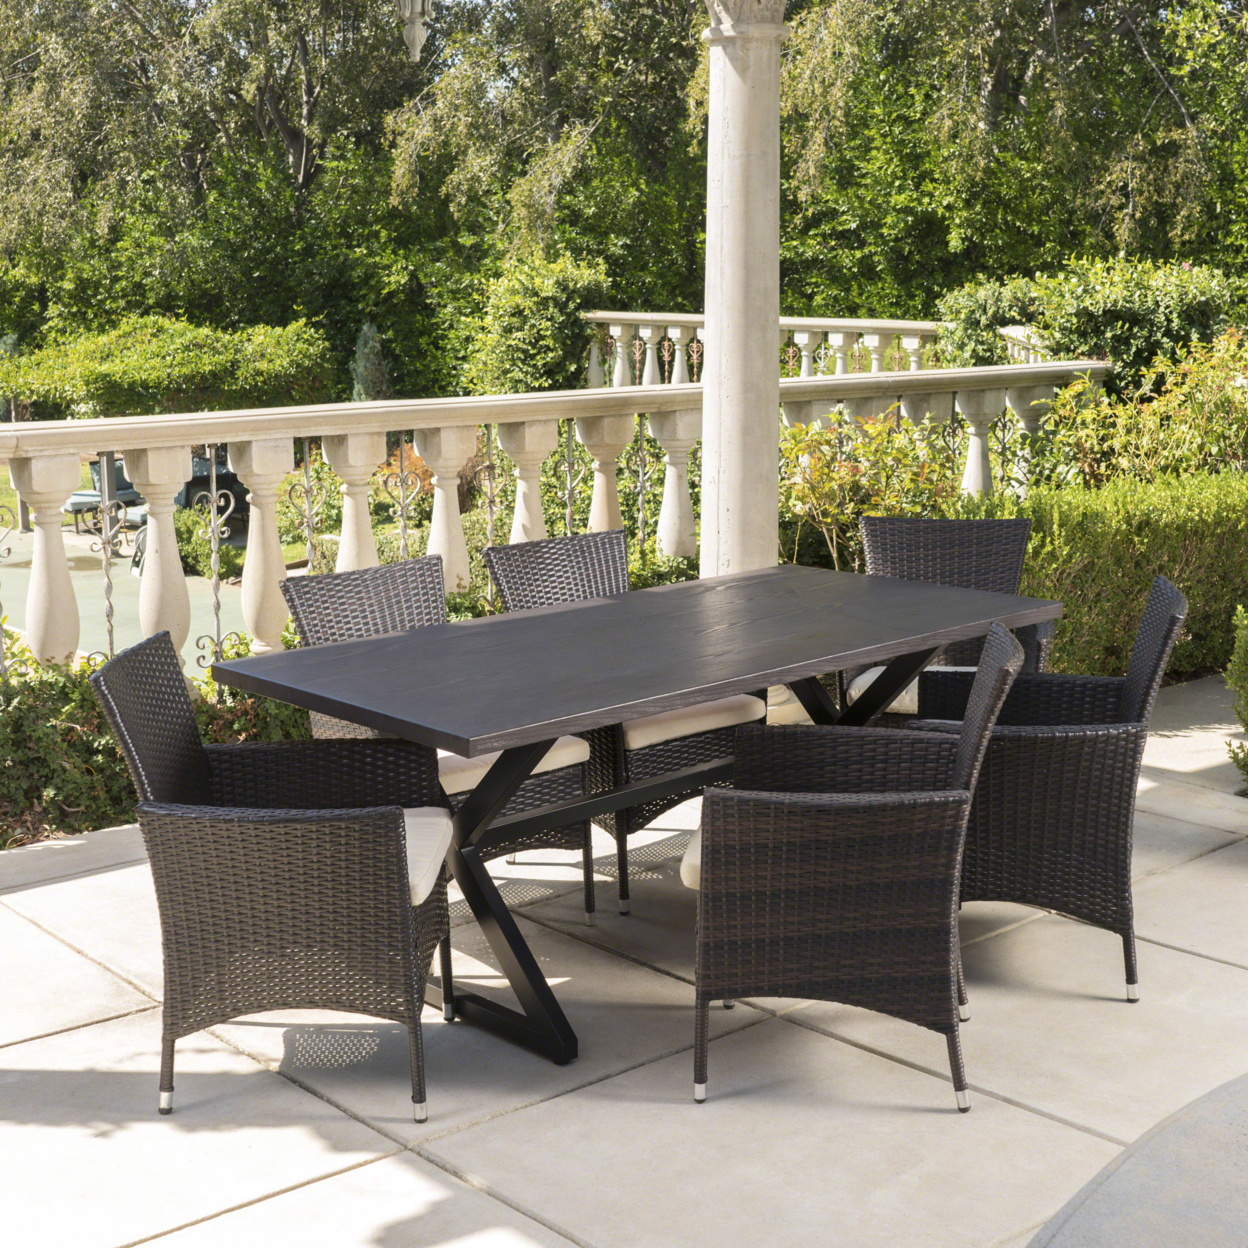 Dionlynn Outdoor 7 Piece Aluminum Dining Set With Wicker Dining Chairs - Gray/Gray